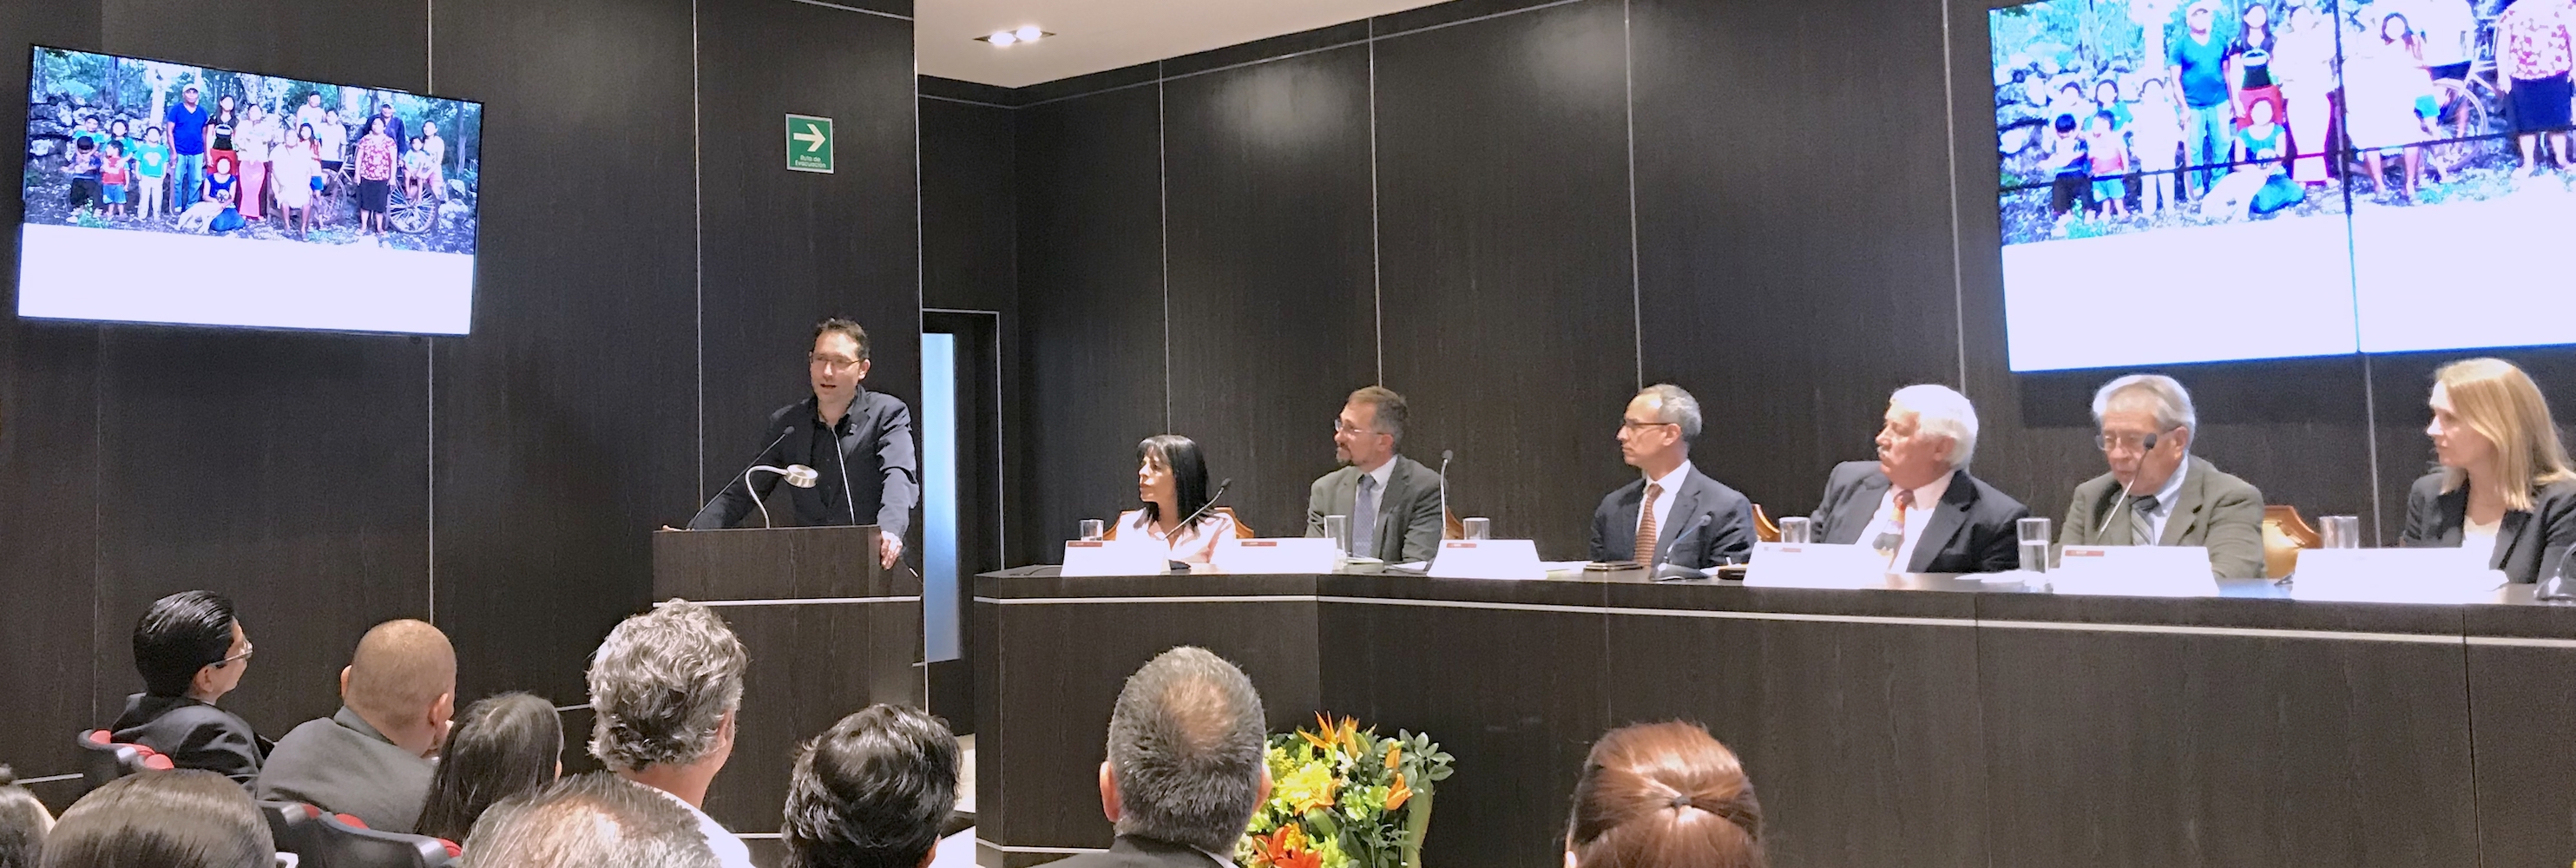 CIMMYT's director of innovative business strategies, Bram Govaerts (left), explained that three changes are needed to reduce the environmental impact of food systems in Mexico: innovation in production practices, reduction of food waste, and change of diets. (Photo: CIMMYT)